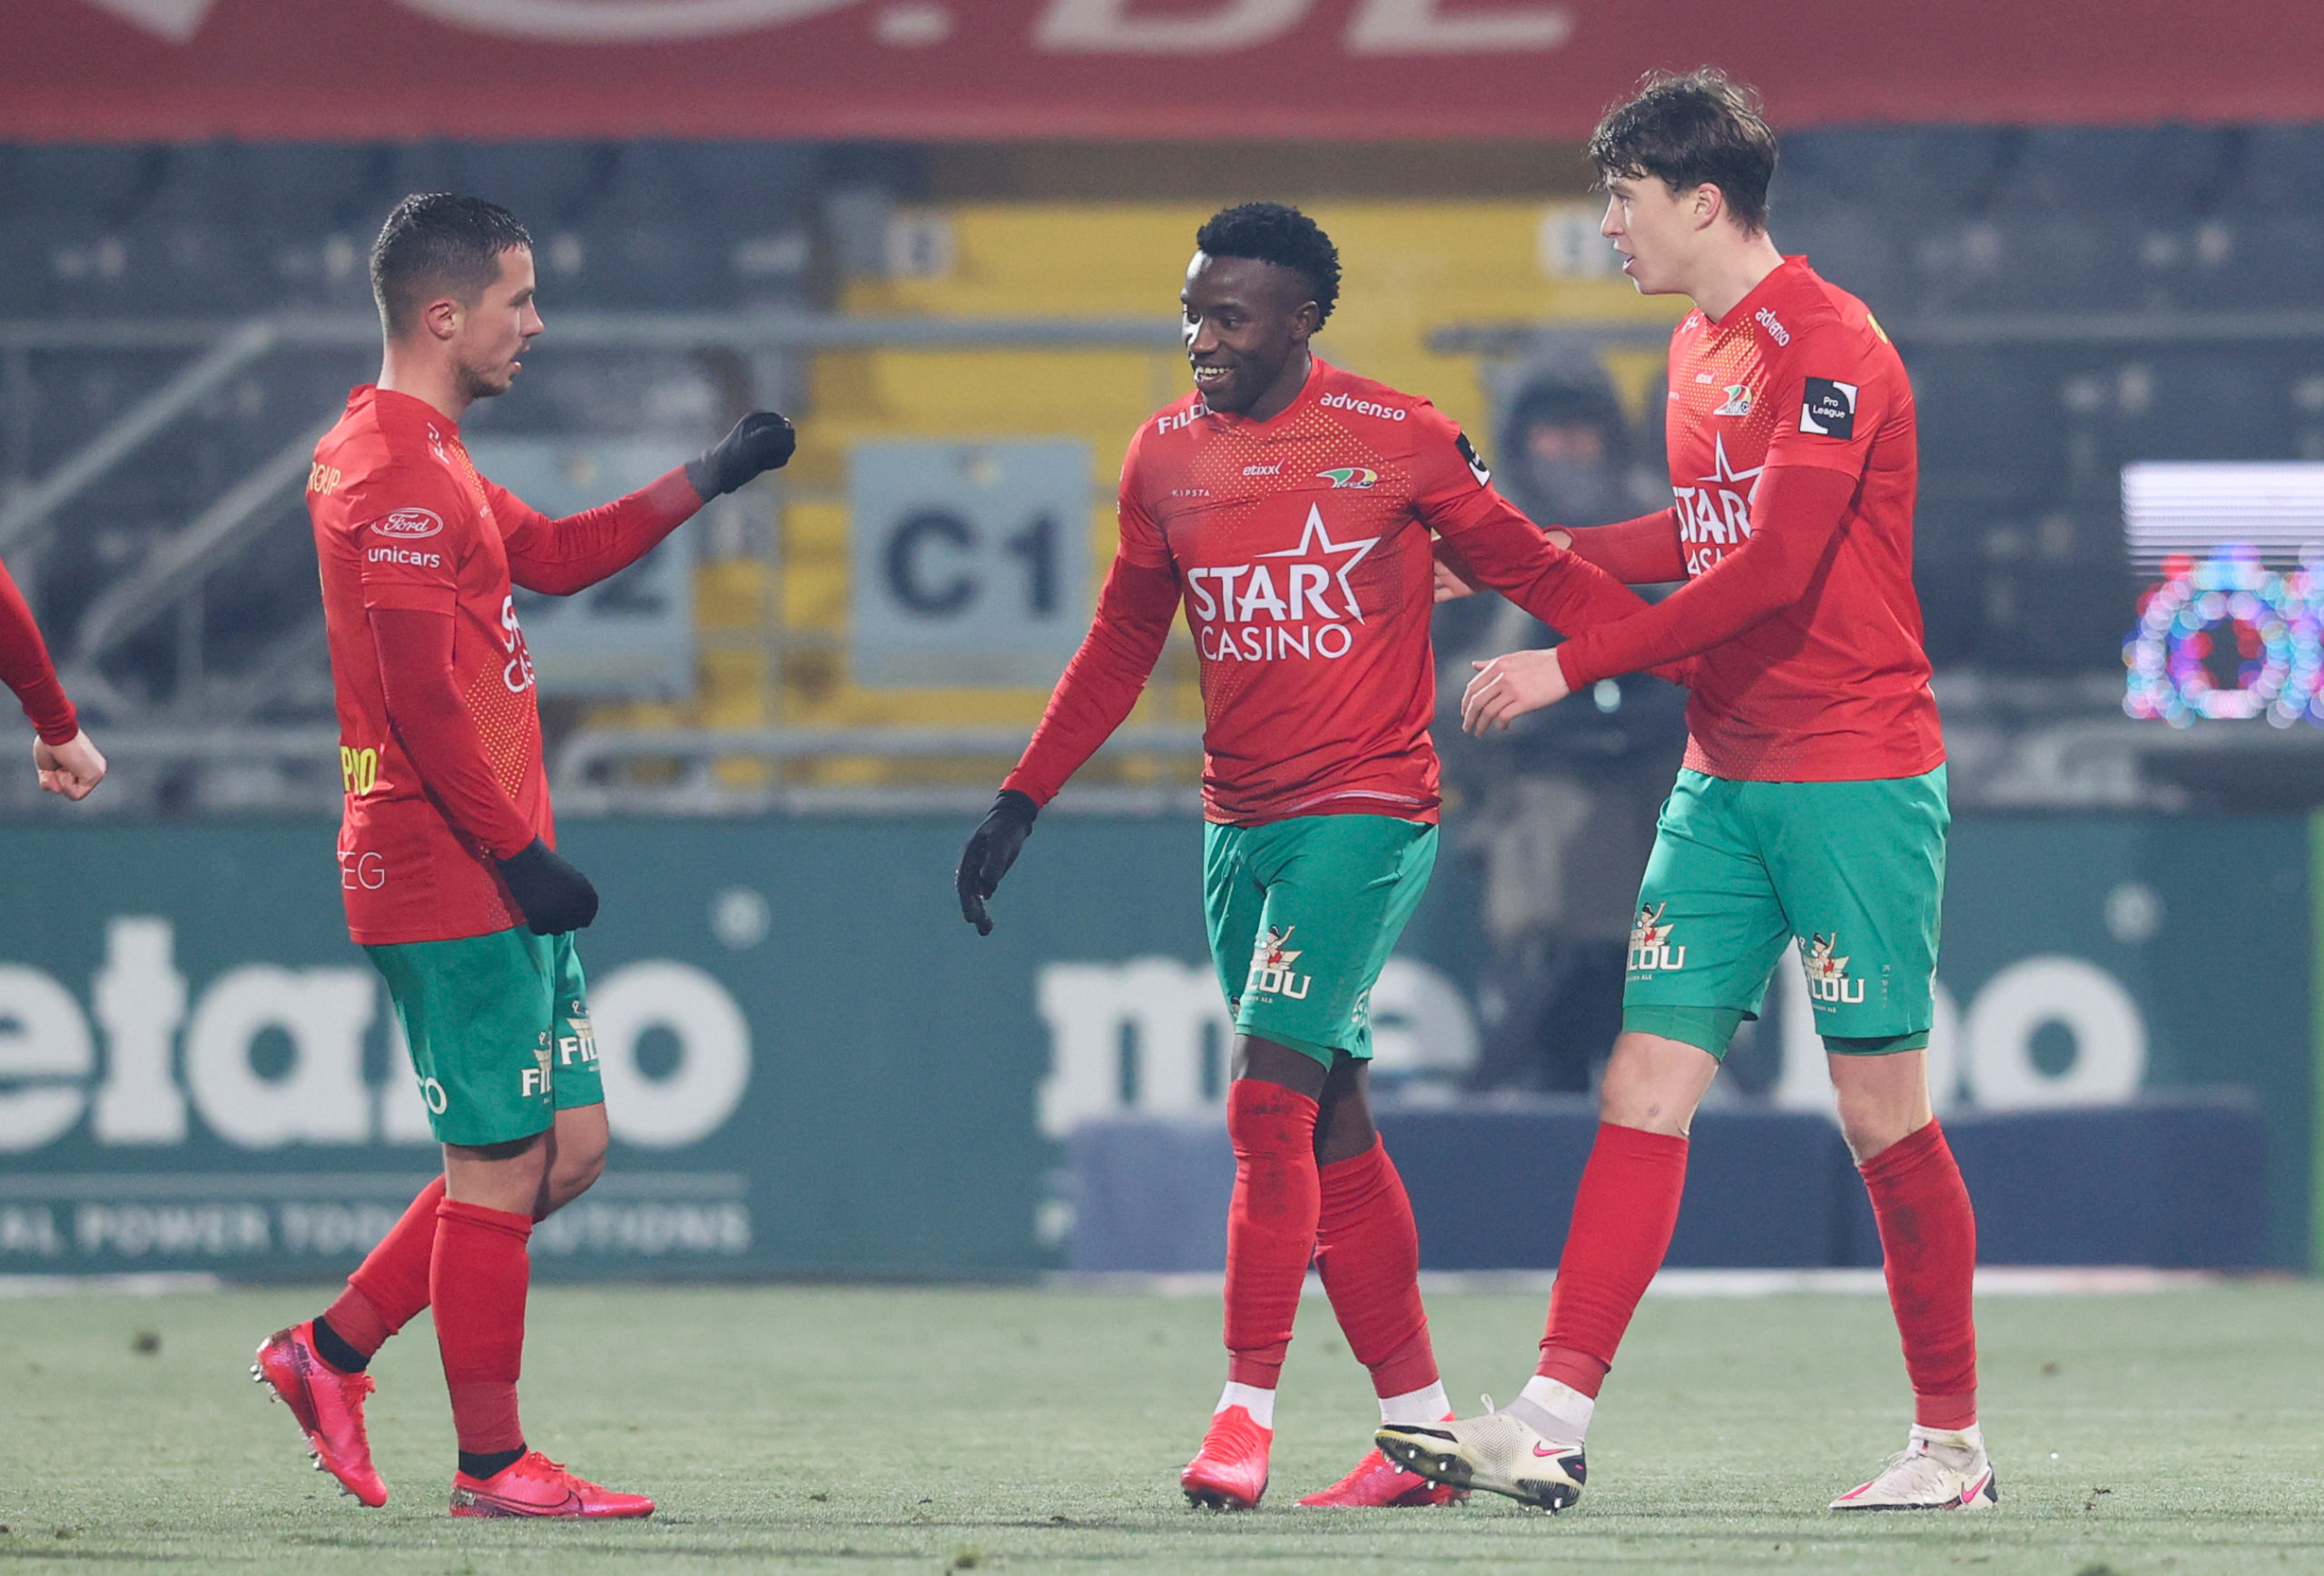 Celtic man Jack Hendry celebrates with Oostende